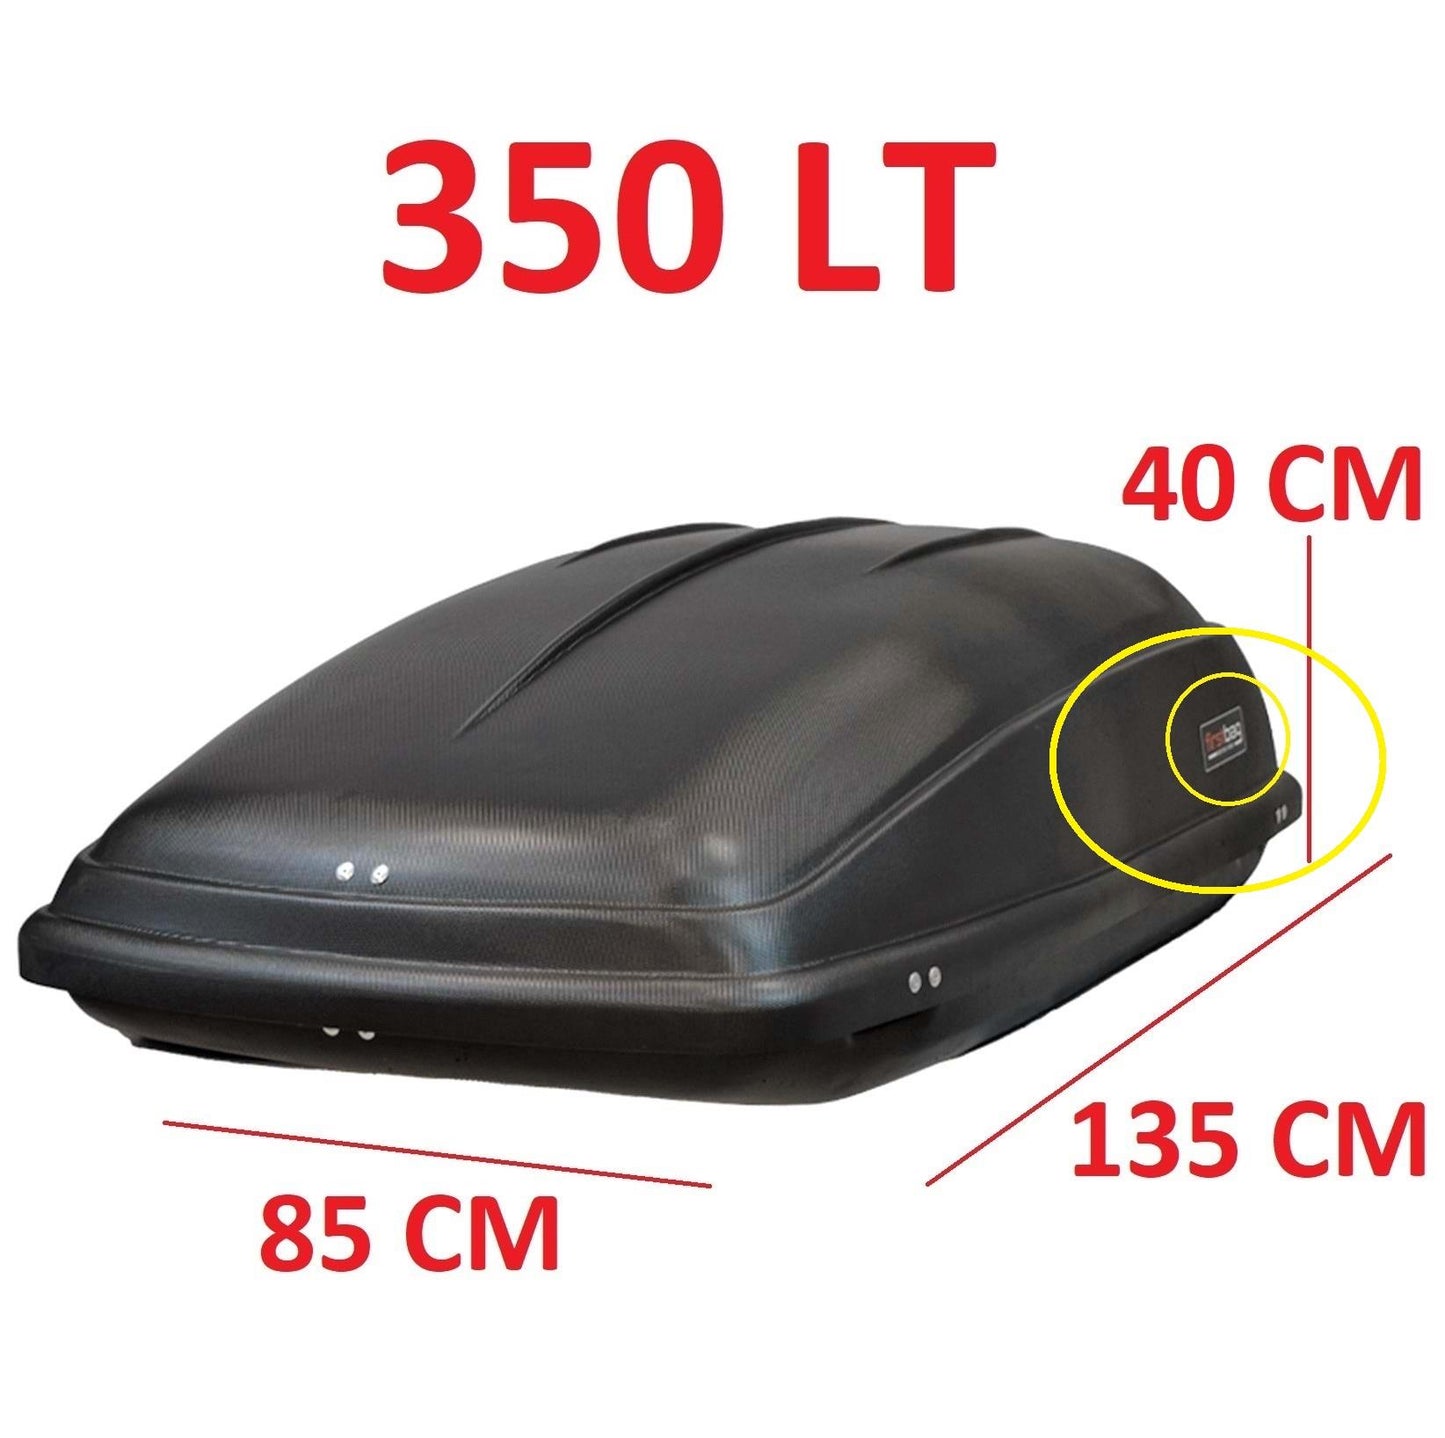 Car Roof Box Luggage Travel Box 350 L collection in person only